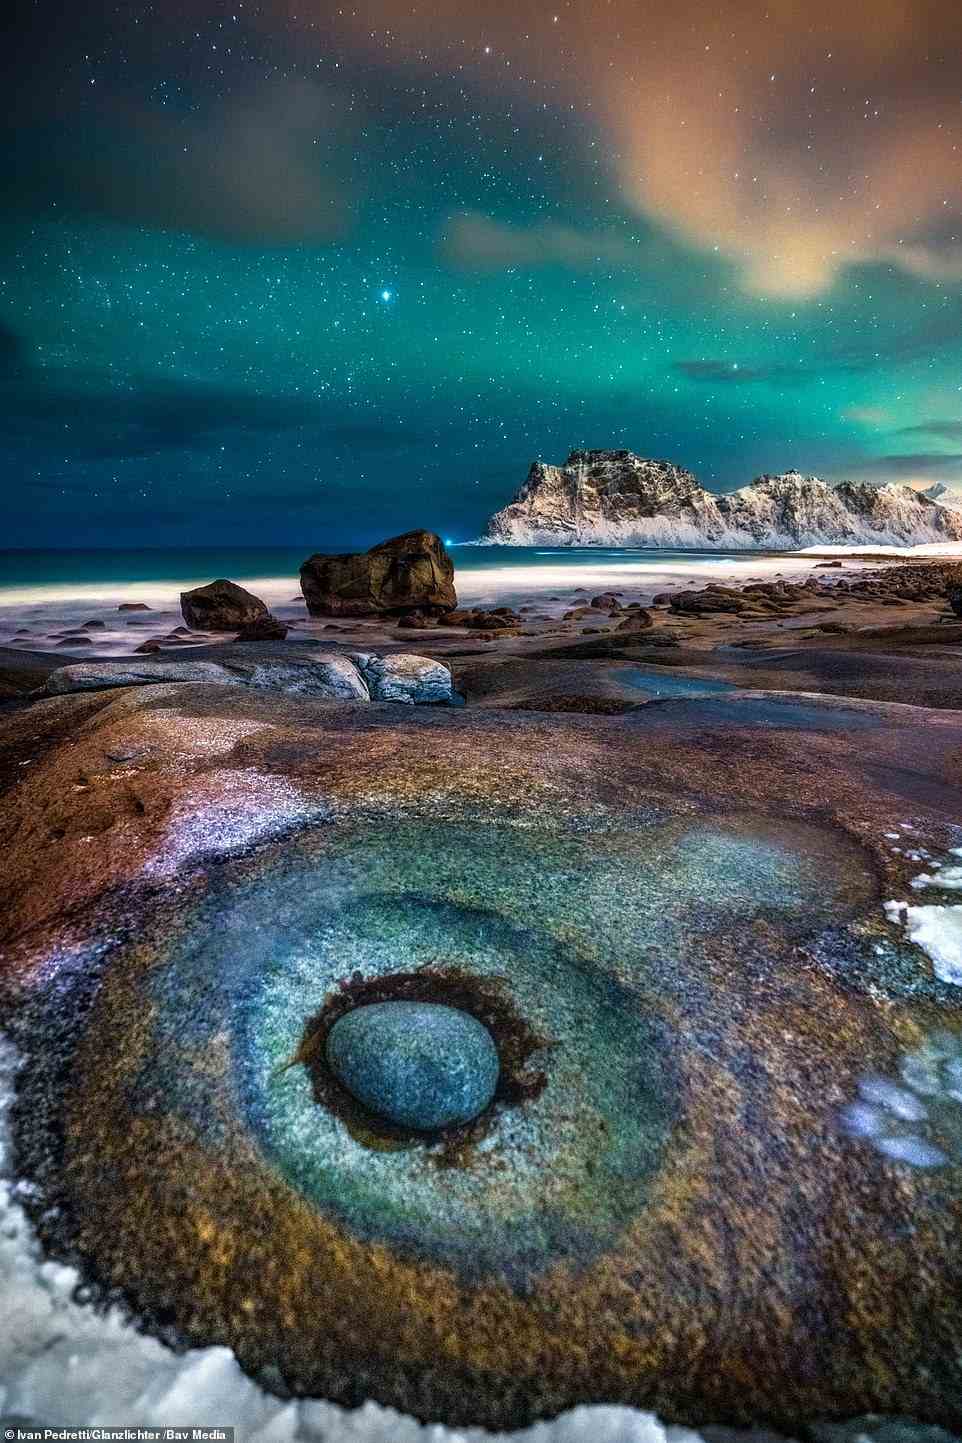 Norway is the only country to feature in multiple Glanzlichter finalists - and with landscapes like this, it's not hard to see why. Italian photographer Ivan Pedretti captured this audacious shot of an eye-shaped rock sitting beneath the Northern Lights on the island of Lofoten in February 2020, just weeks before the Covid pandemic. Pedretti's photo is a stunning illustration of peace, which now seems distant. That might be why it was the overall winner of this year's Glanzlichter Competition - meaning the €2,500 is his to keep.